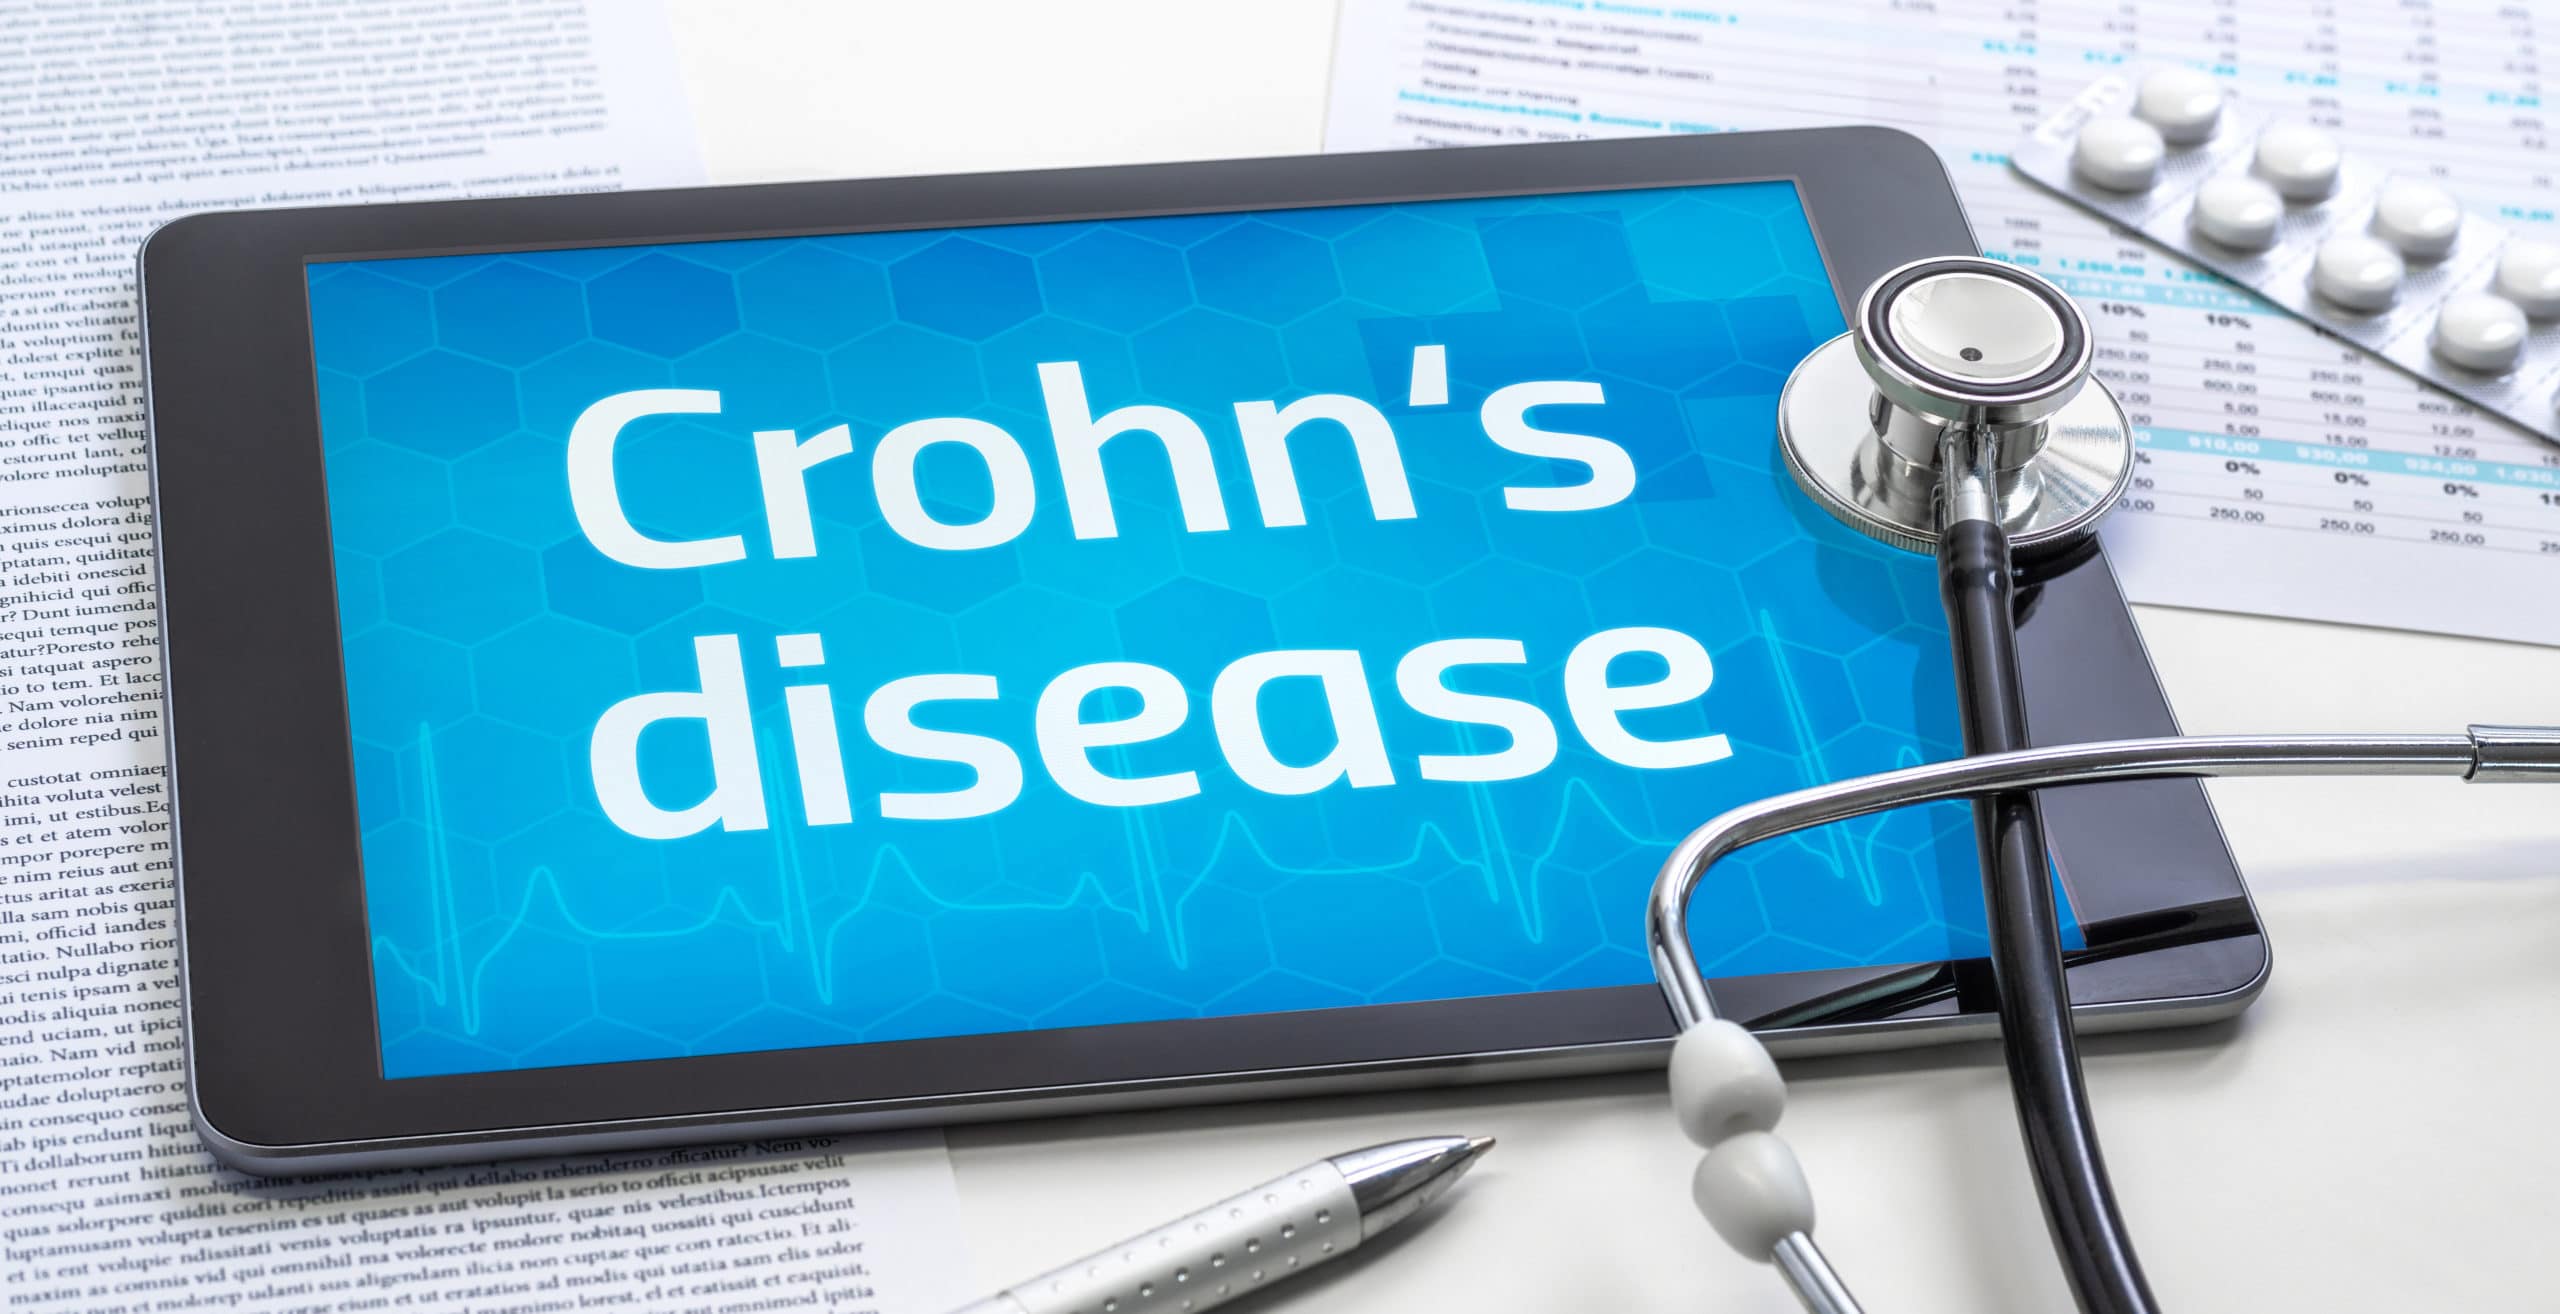 The word Crohn's disease on the display of a tablet